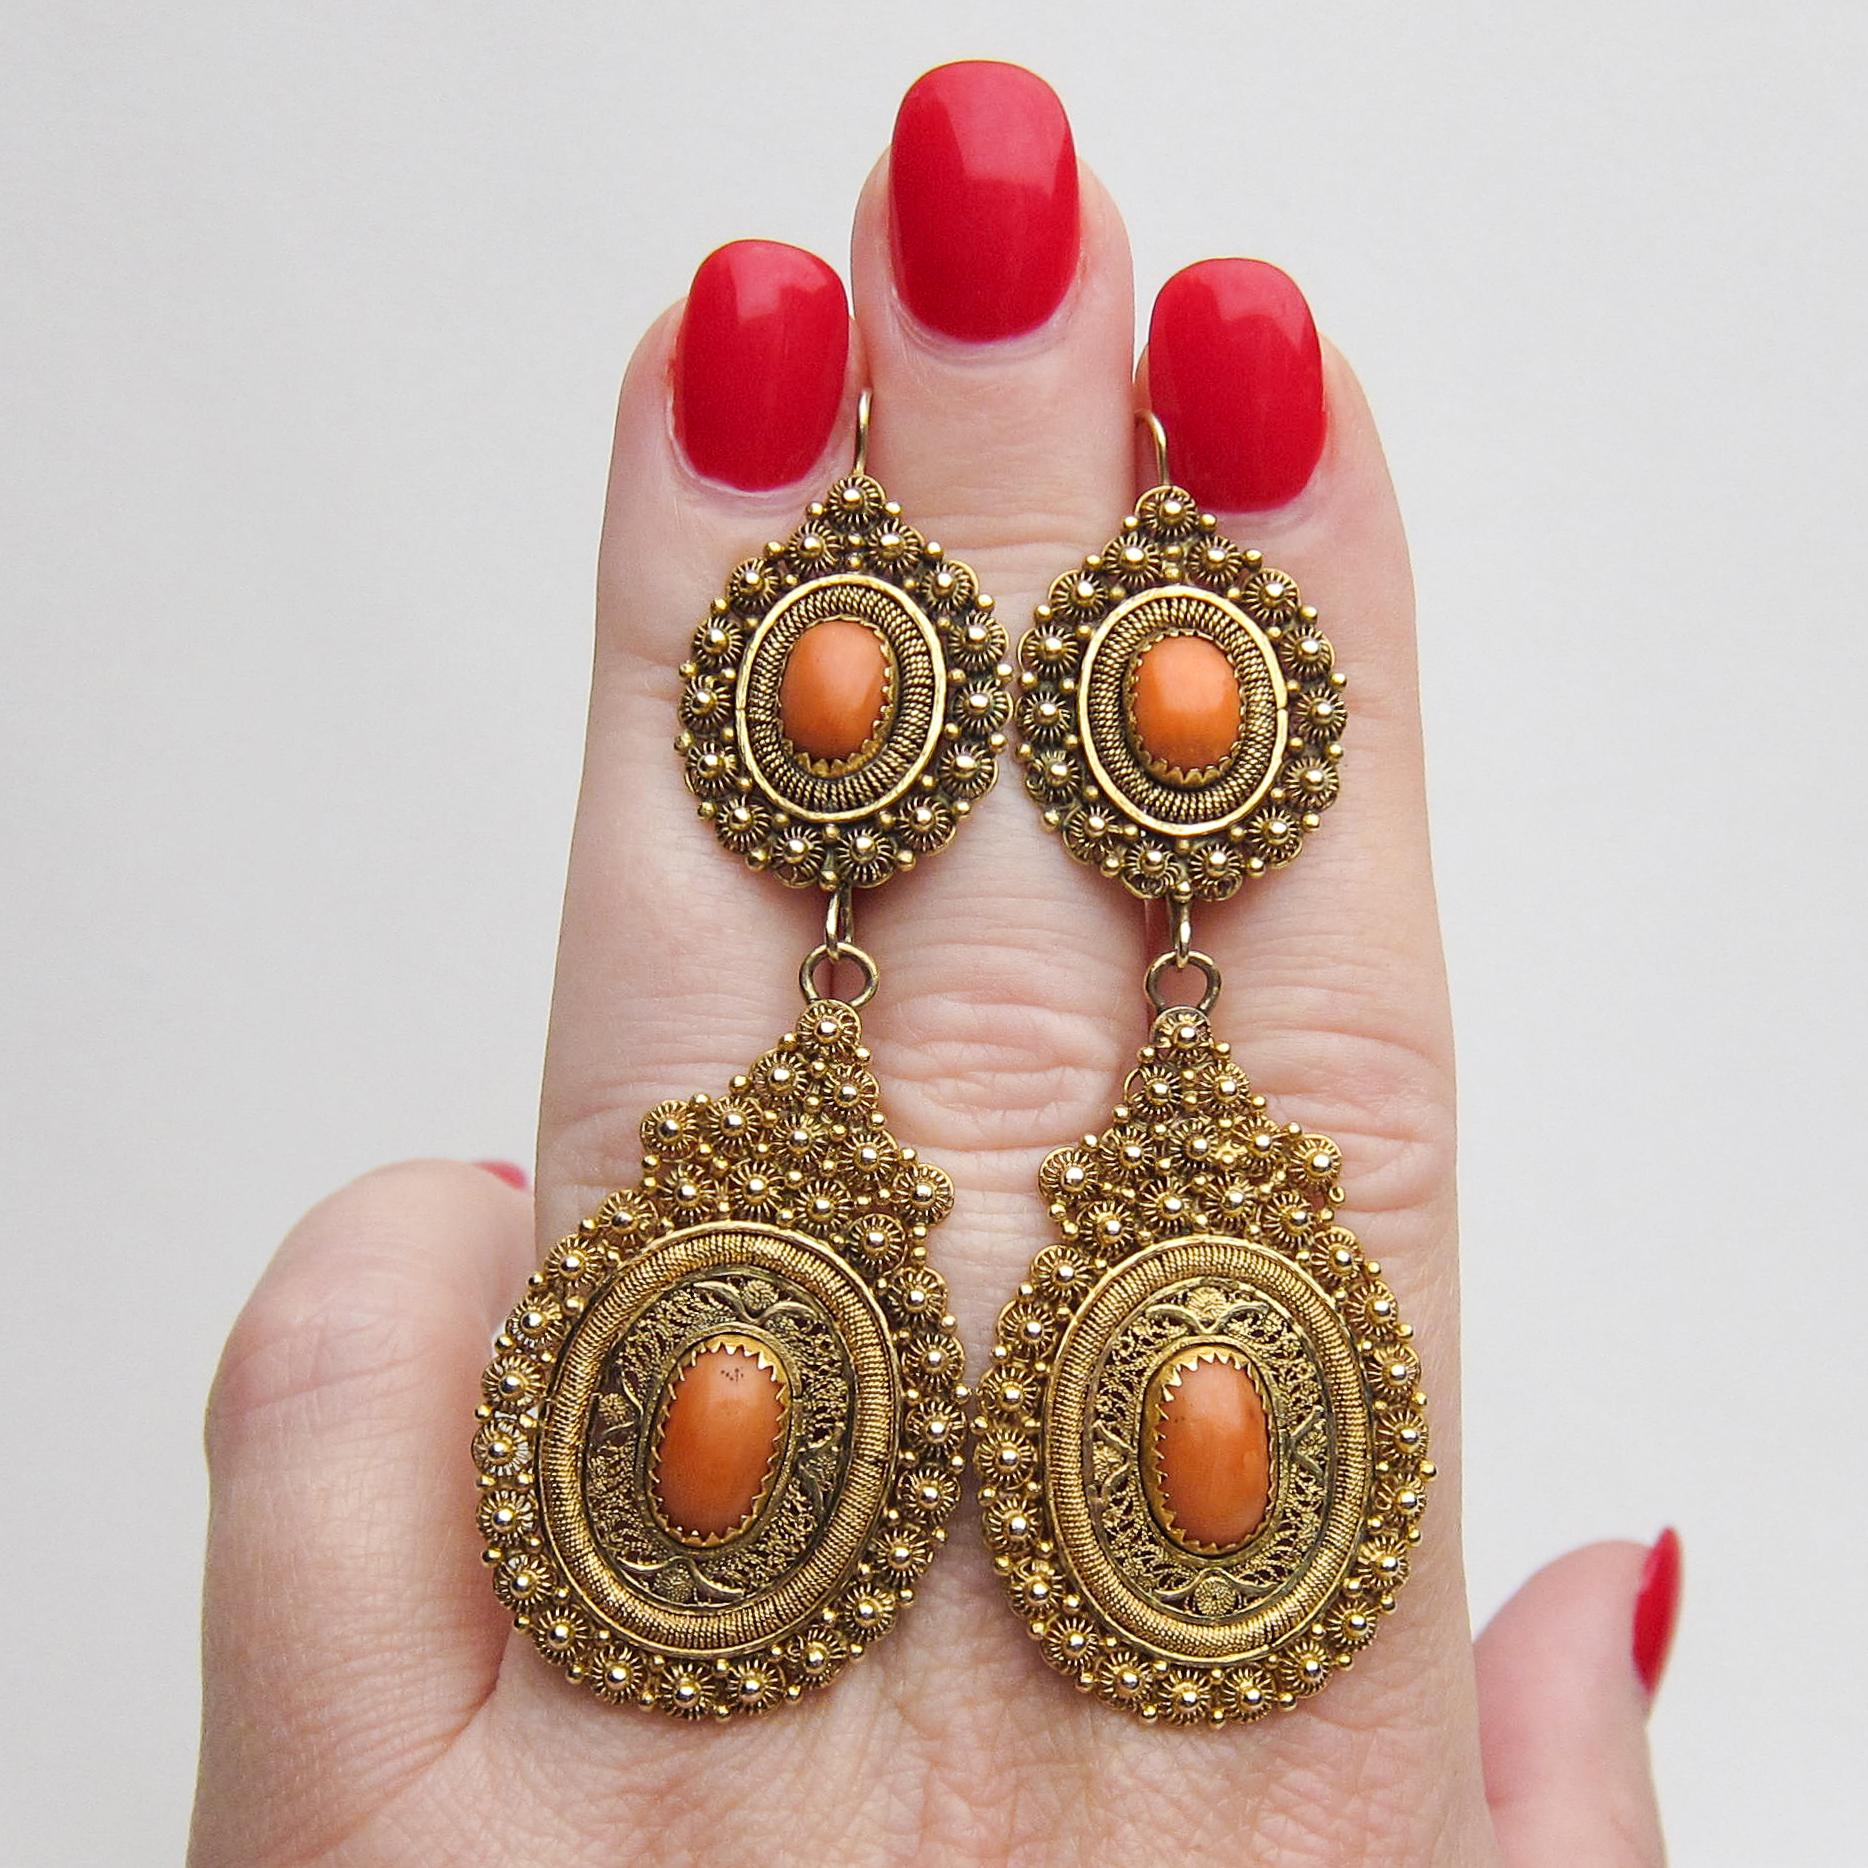  14 Karat Gold Handmade Coral Cabochon Dangle Earrings In Excellent Condition For Sale In Seattle, WA